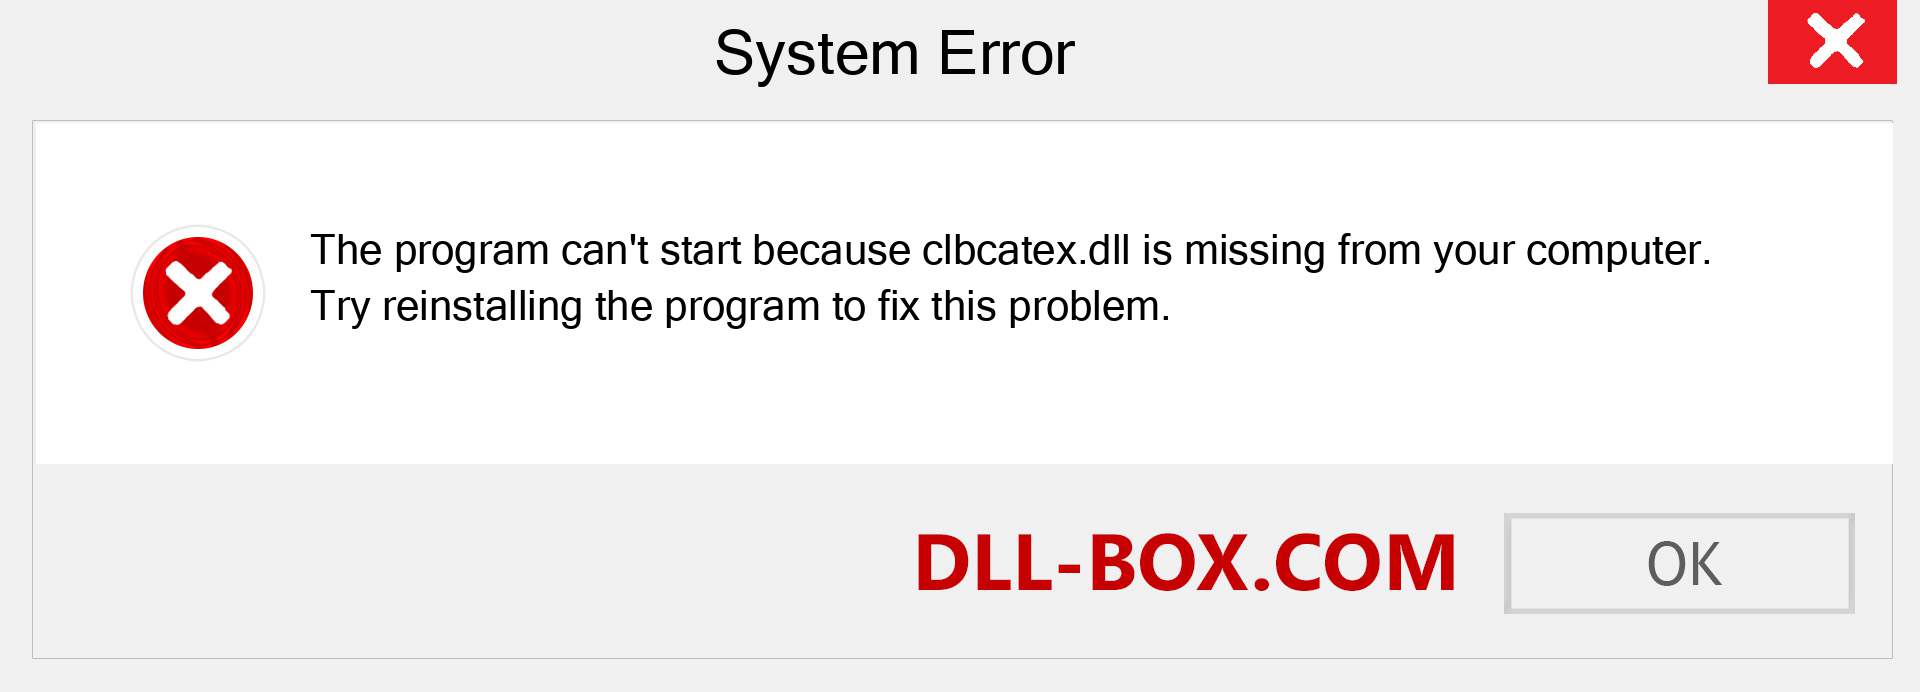  clbcatex.dll file is missing?. Download for Windows 7, 8, 10 - Fix  clbcatex dll Missing Error on Windows, photos, images